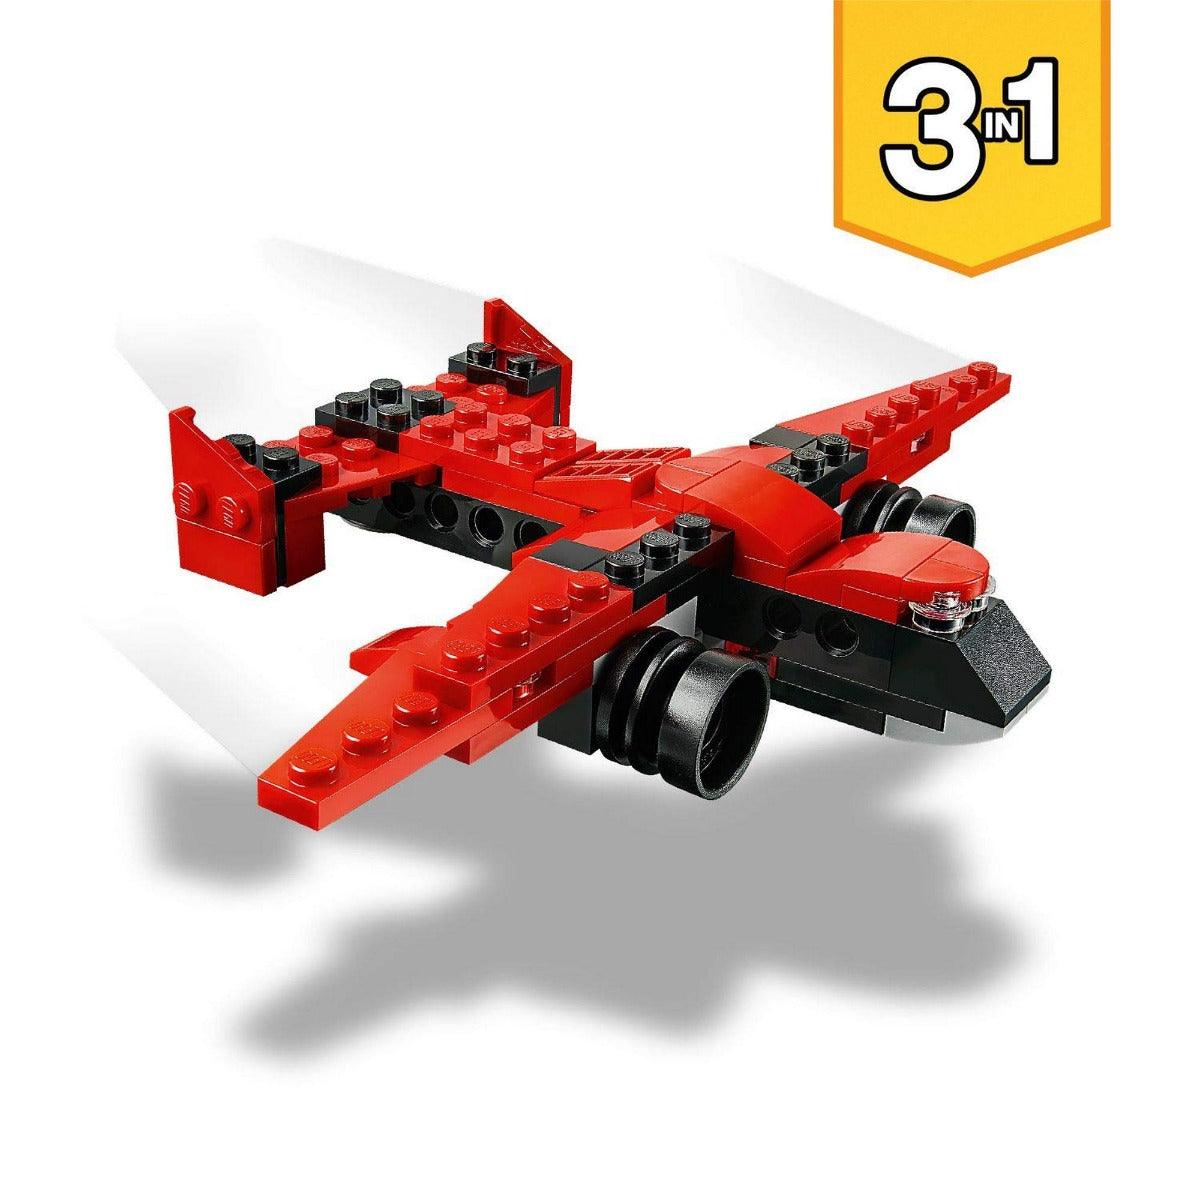 LEGO Creator 3in1 Sports Car - Hot Rod - Plane Building Kit for Ages 6+